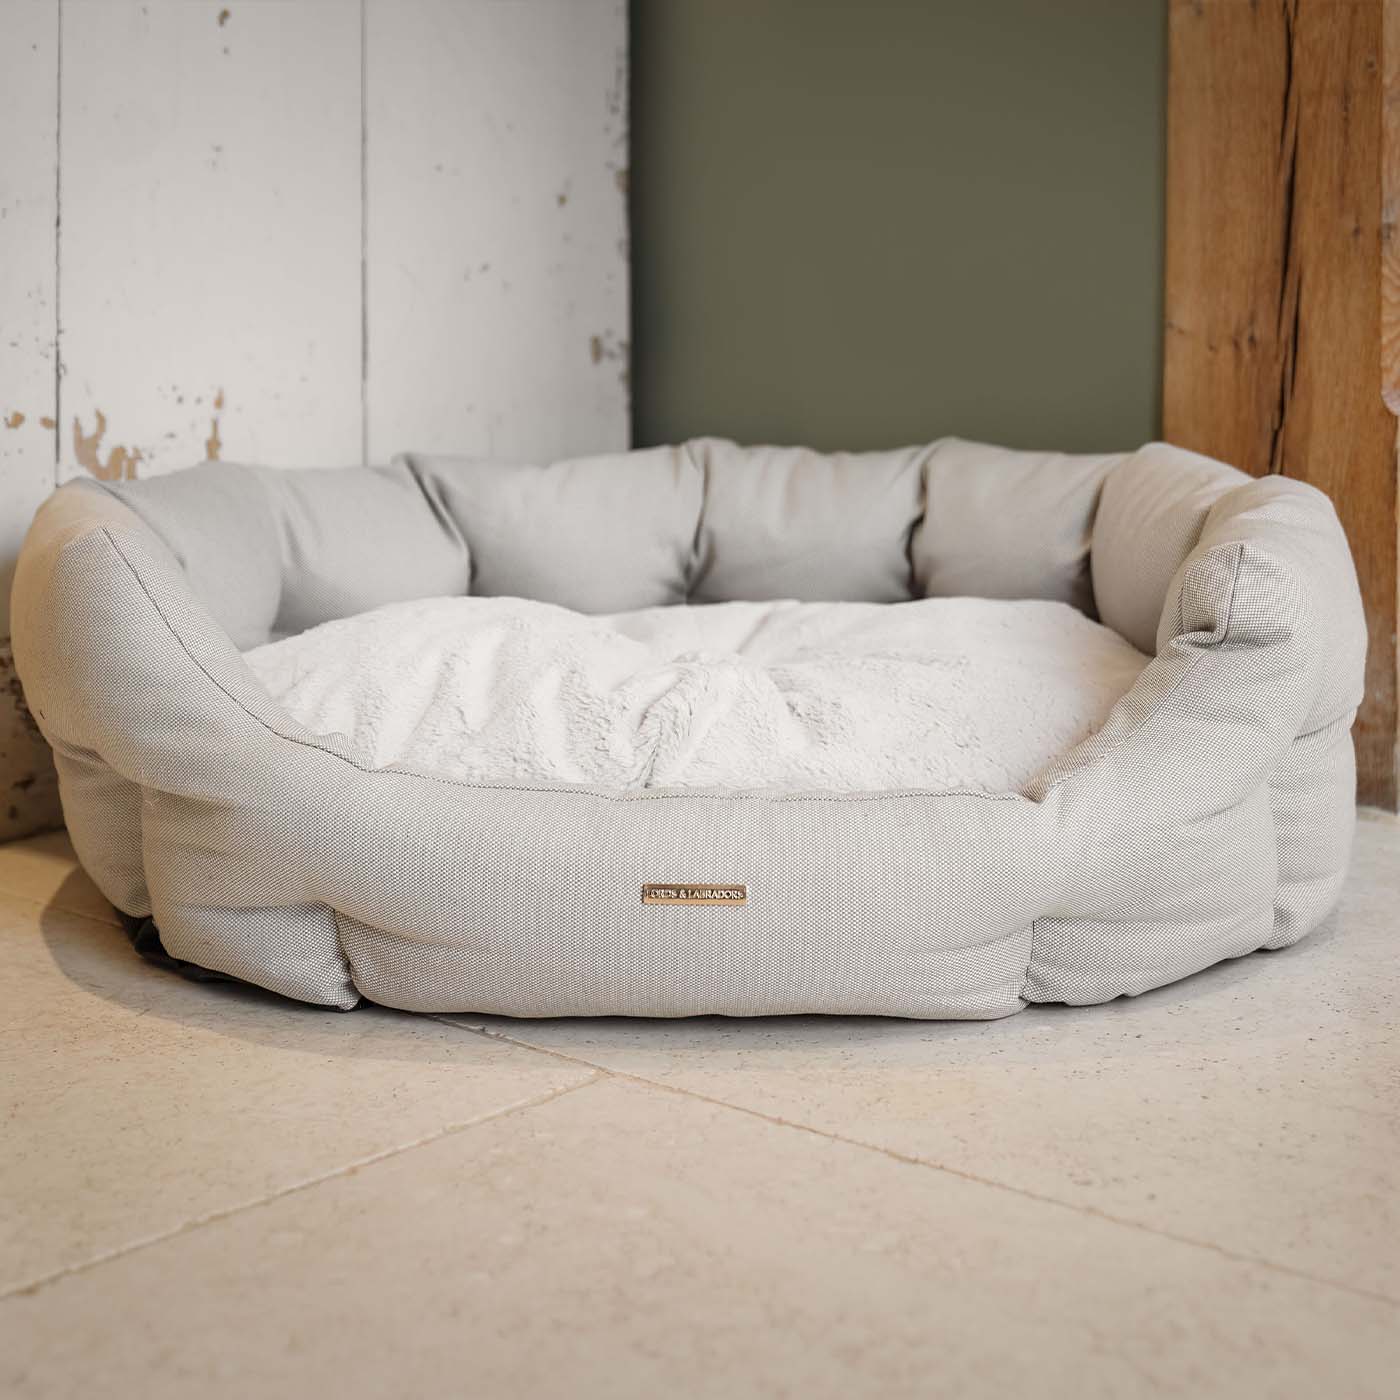 Discover our luxury twill oval dog bed in beautiful Linen, the ideal choice for dogs to enjoy blissful nap-time, featuring reversible inner cushion with raised sides for dogs who love to rest their head for the ultimate cosiness! Handcrafted in Italy for pure pet luxury! Available now at Lords & Labradors 